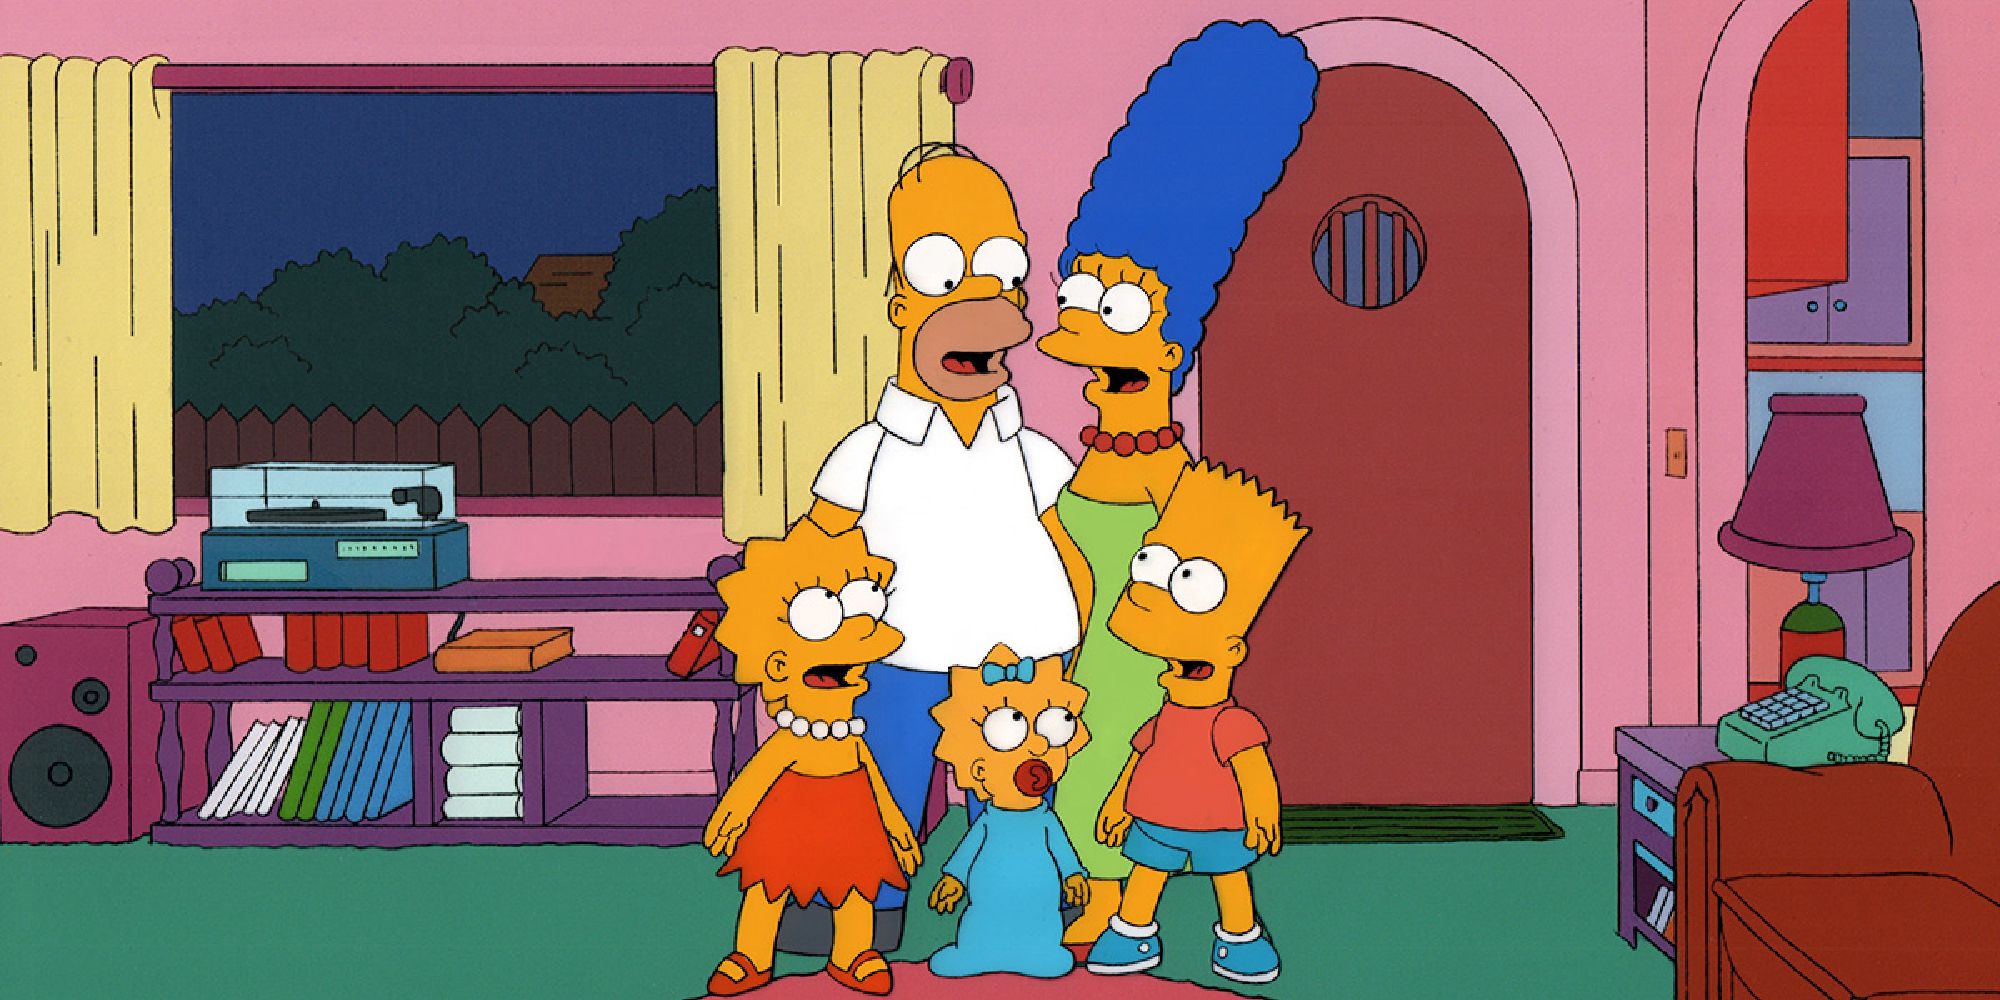 Marge, Homer, Lisa, Maggie and Bart standing together in their living room in The Simpsons